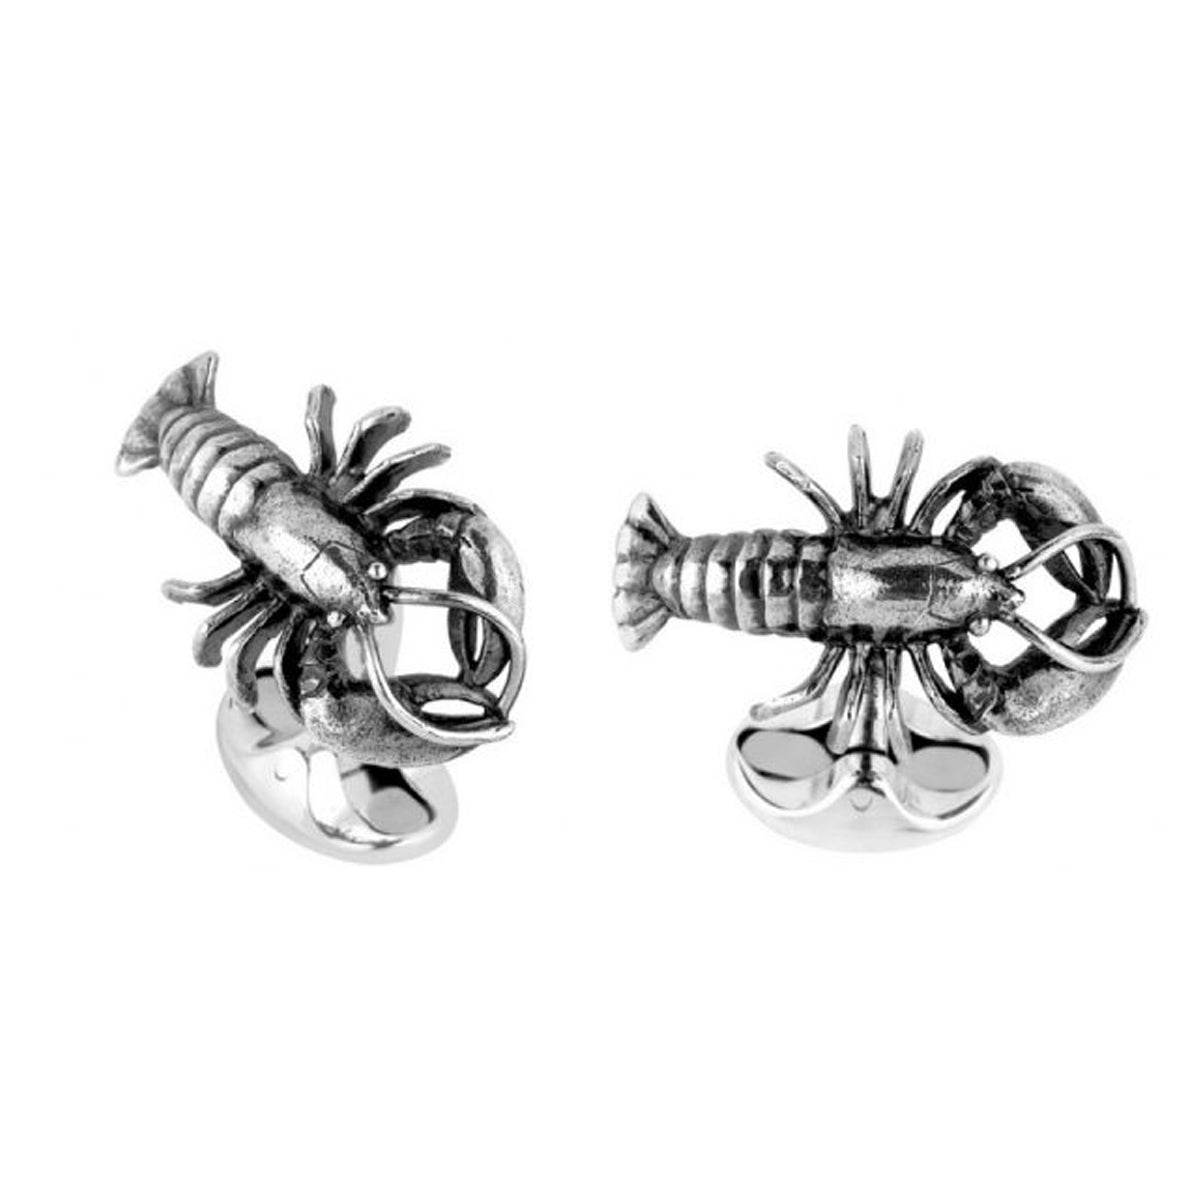 A pair of Sterling Silver Springback Lobster Cufflinks